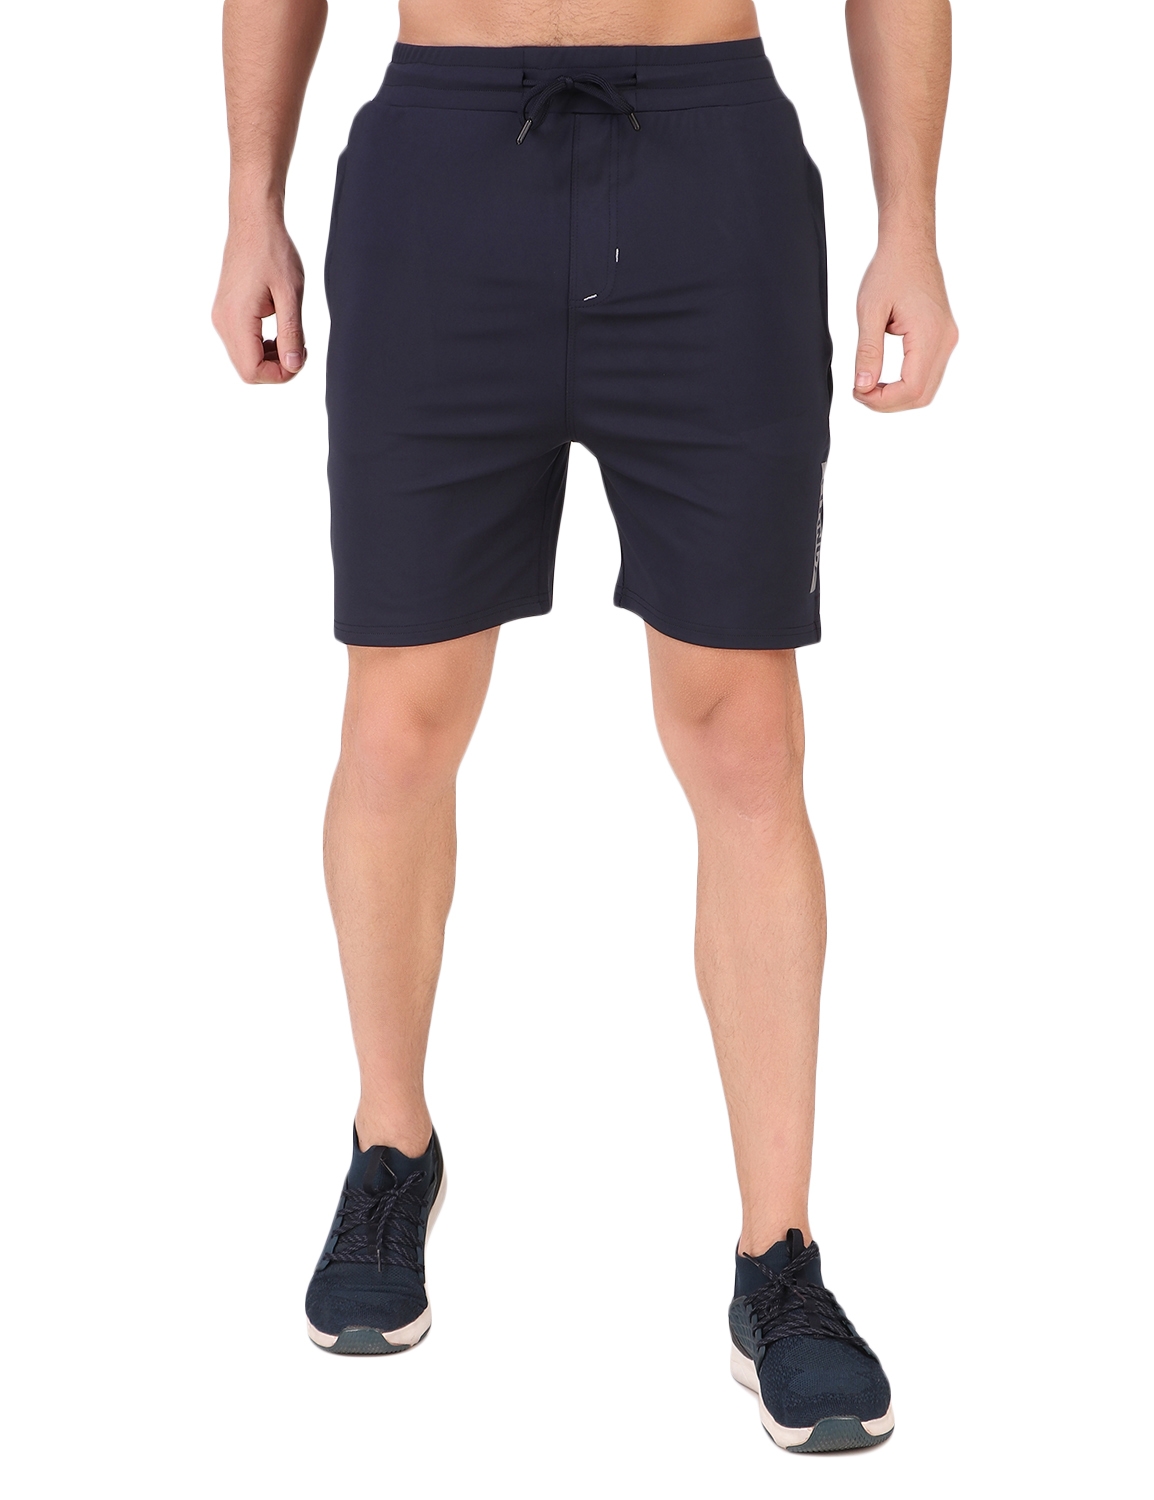 Fitinc Stretchable Men's Navy Blue Shorts for Gym, Running, Jogging, Yoga, Cycling, and Active Sports